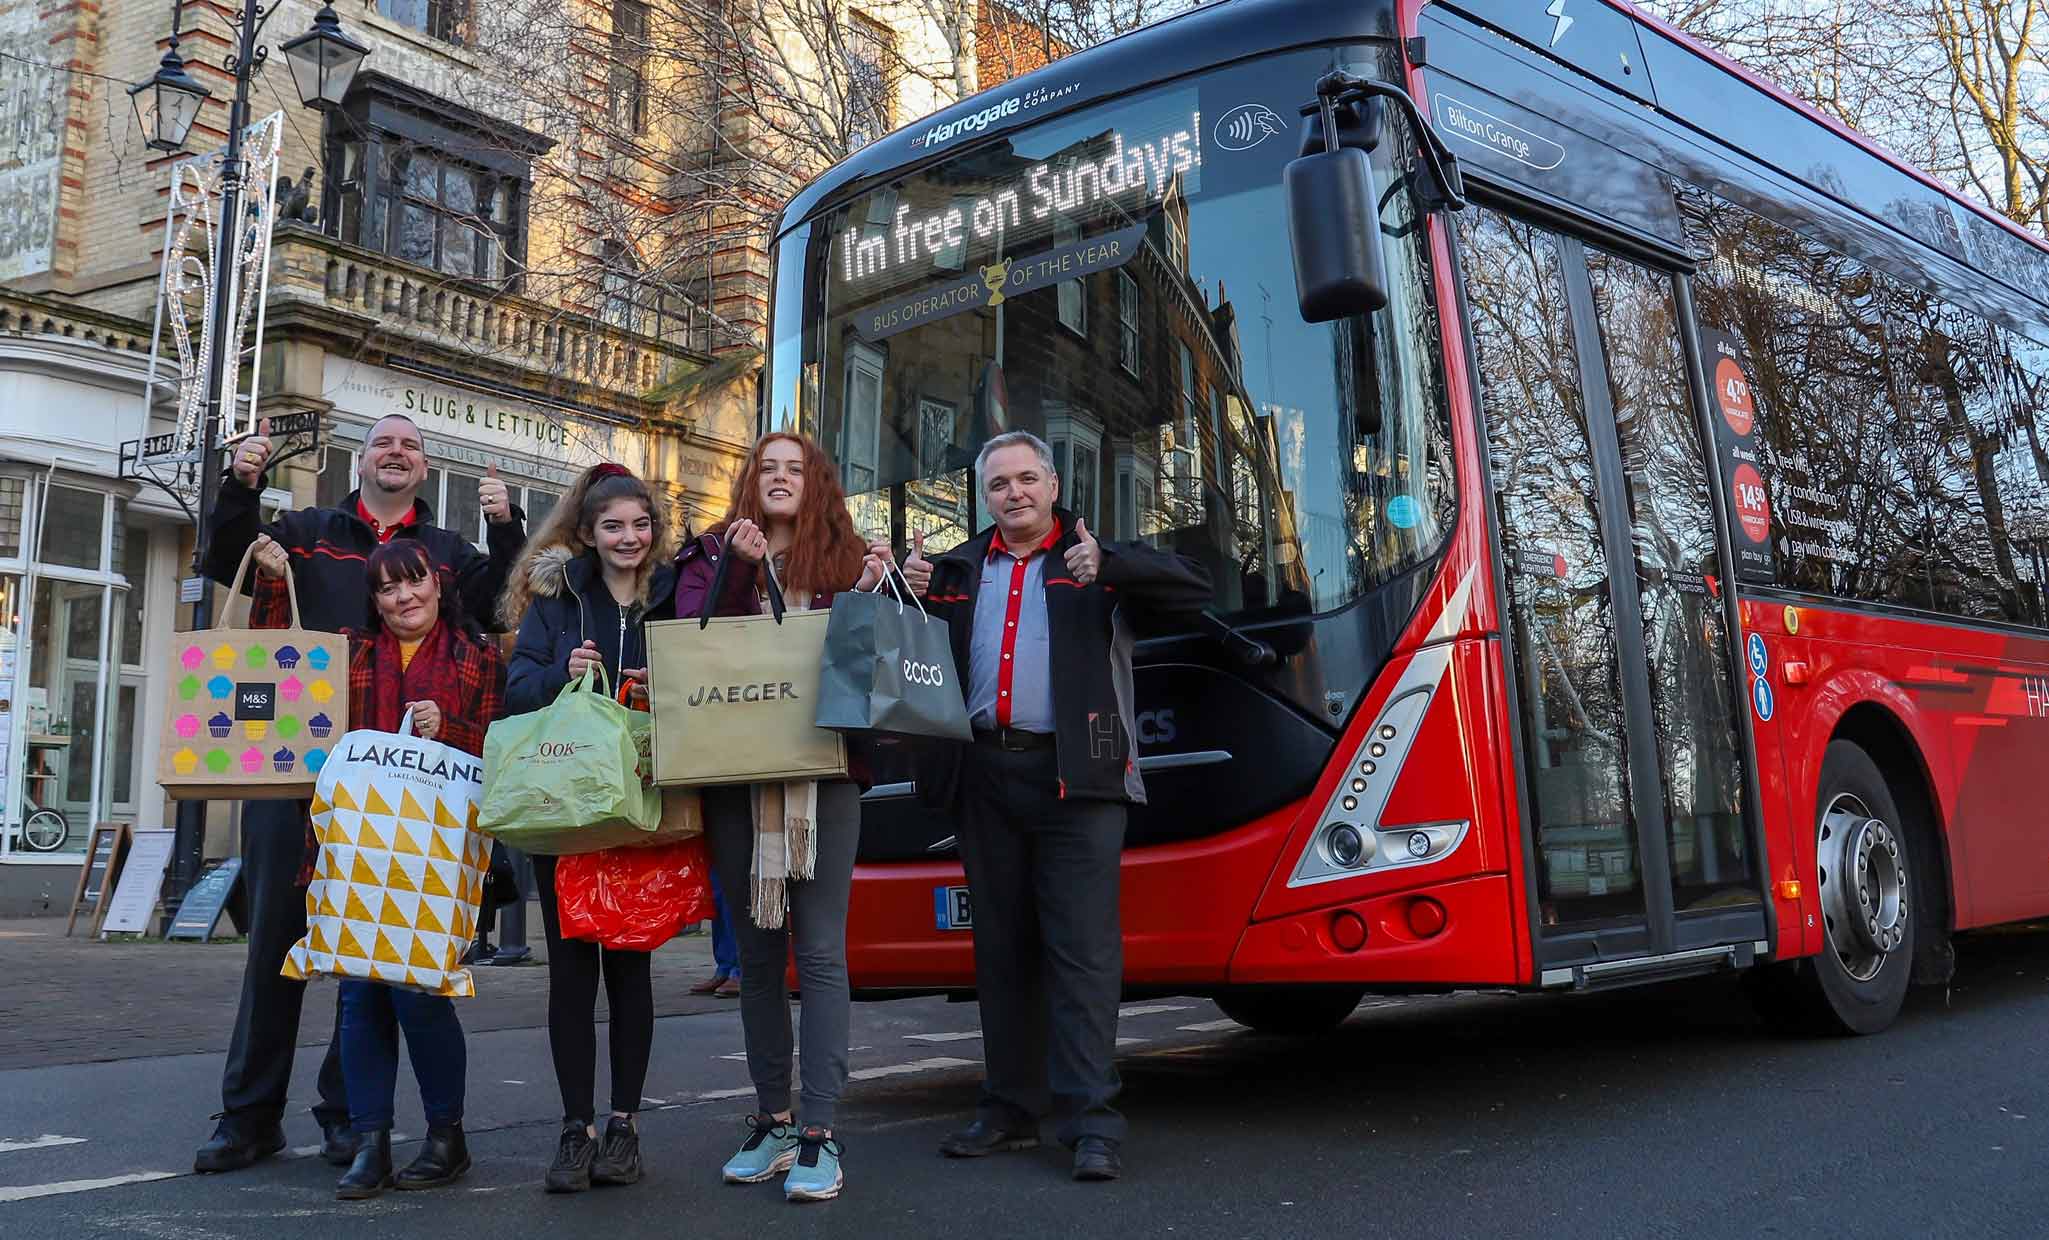 Flashback to the run-up to Christmas 2019, when sponsorship from Harrogate BID supported free Sunday journeys on Harrogate Electrics buses throughout the run-up to Christmas. The BID organisation, which represents the spa town's business community, is again sponsoring free Sunday journeys on three routes in December and onward into 2021